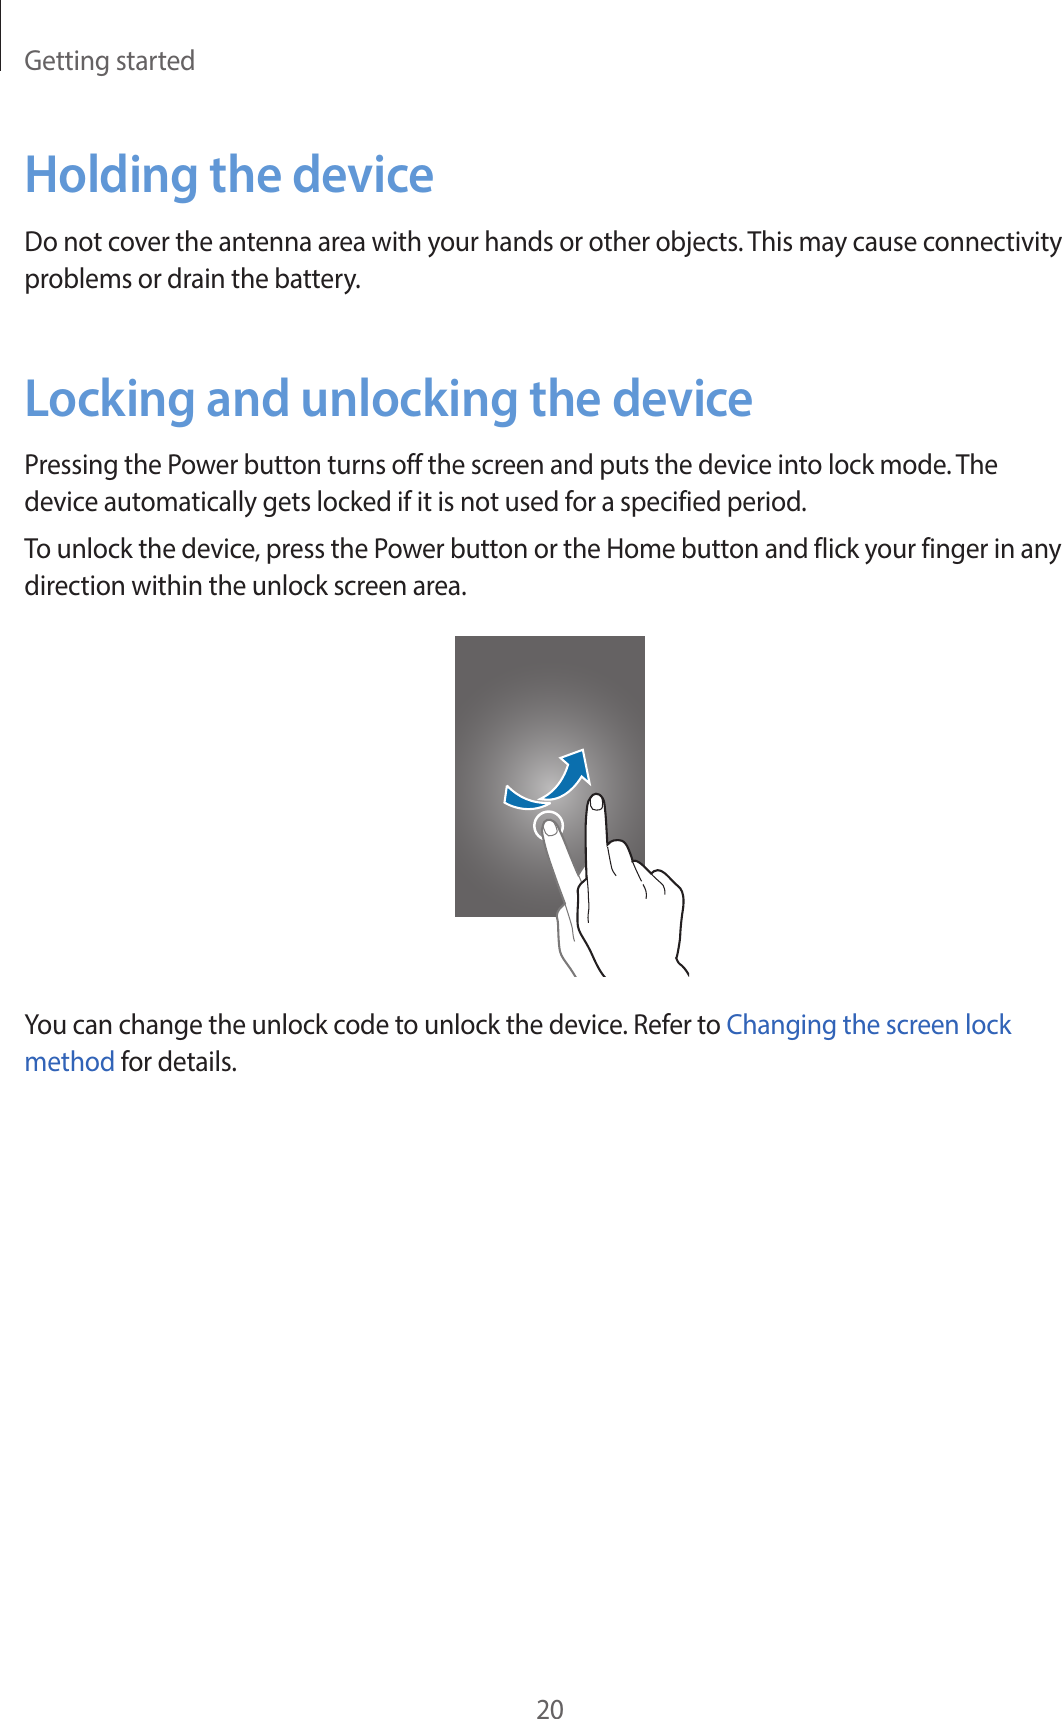 Getting started20Holding the deviceDo not cover the antenna area with your hands or other objects. This may cause connectivity problems or drain the battery.Locking and unlocking the devicePressing the Power button turns off the screen and puts the device into lock mode. The device automatically gets locked if it is not used for a specified period.To unlock the device, press the Power button or the Home button and flick your finger in any direction within the unlock screen area.You can change the unlock code to unlock the device. Refer to Changing the screen lock method for details.